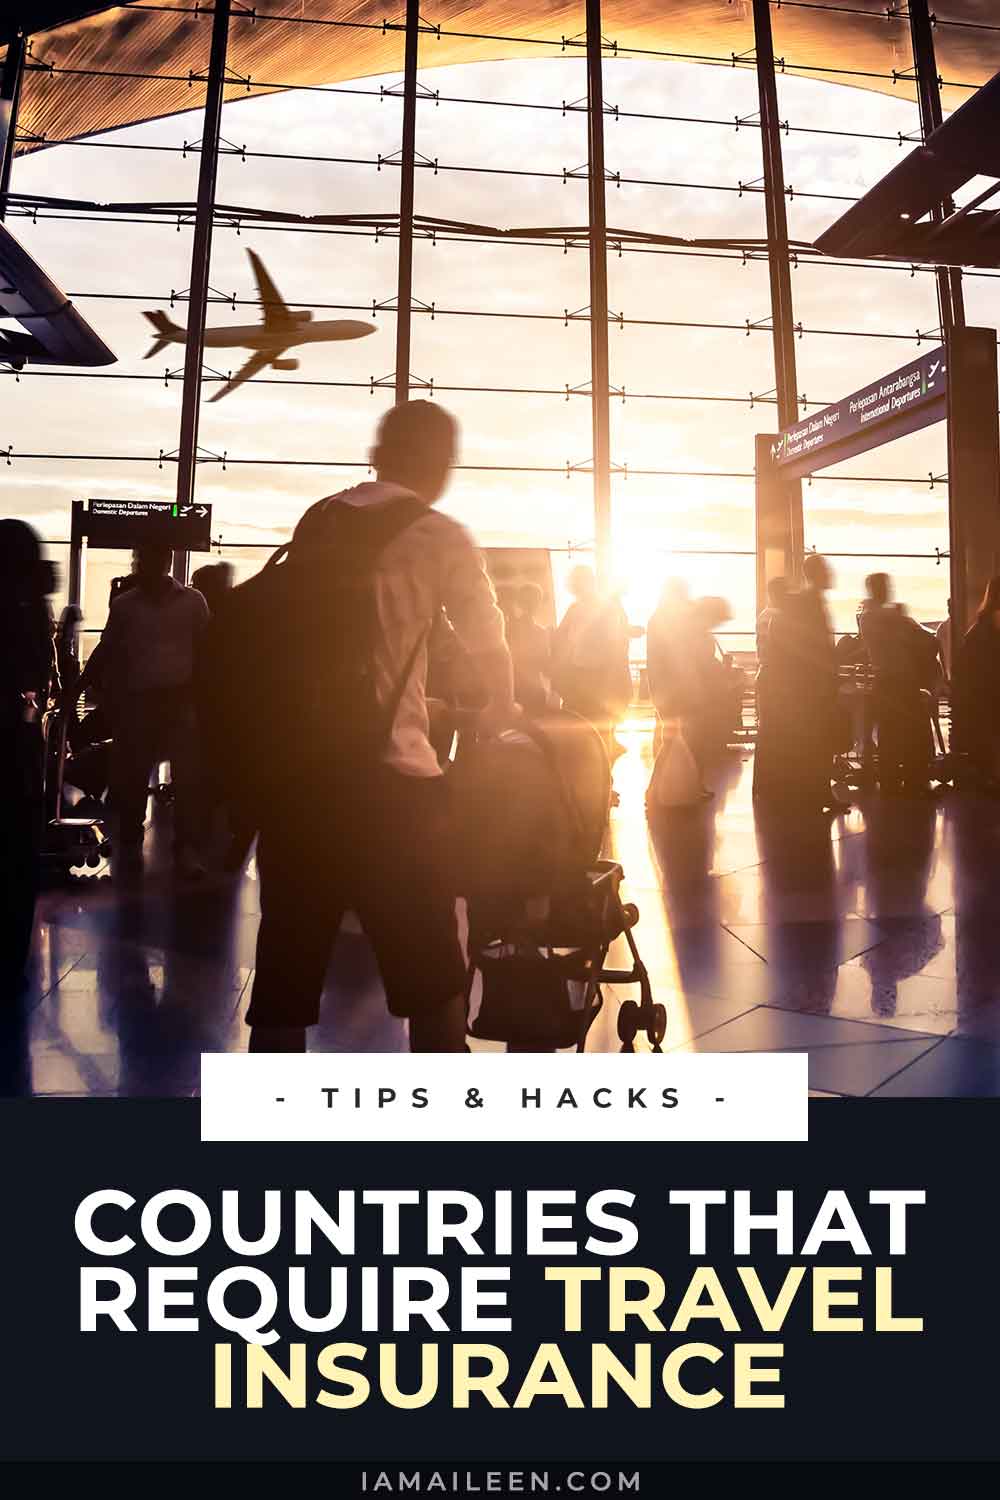 Complete List of Countries That Require Travel Insurance for Entry (with COVID-19 Coverage)